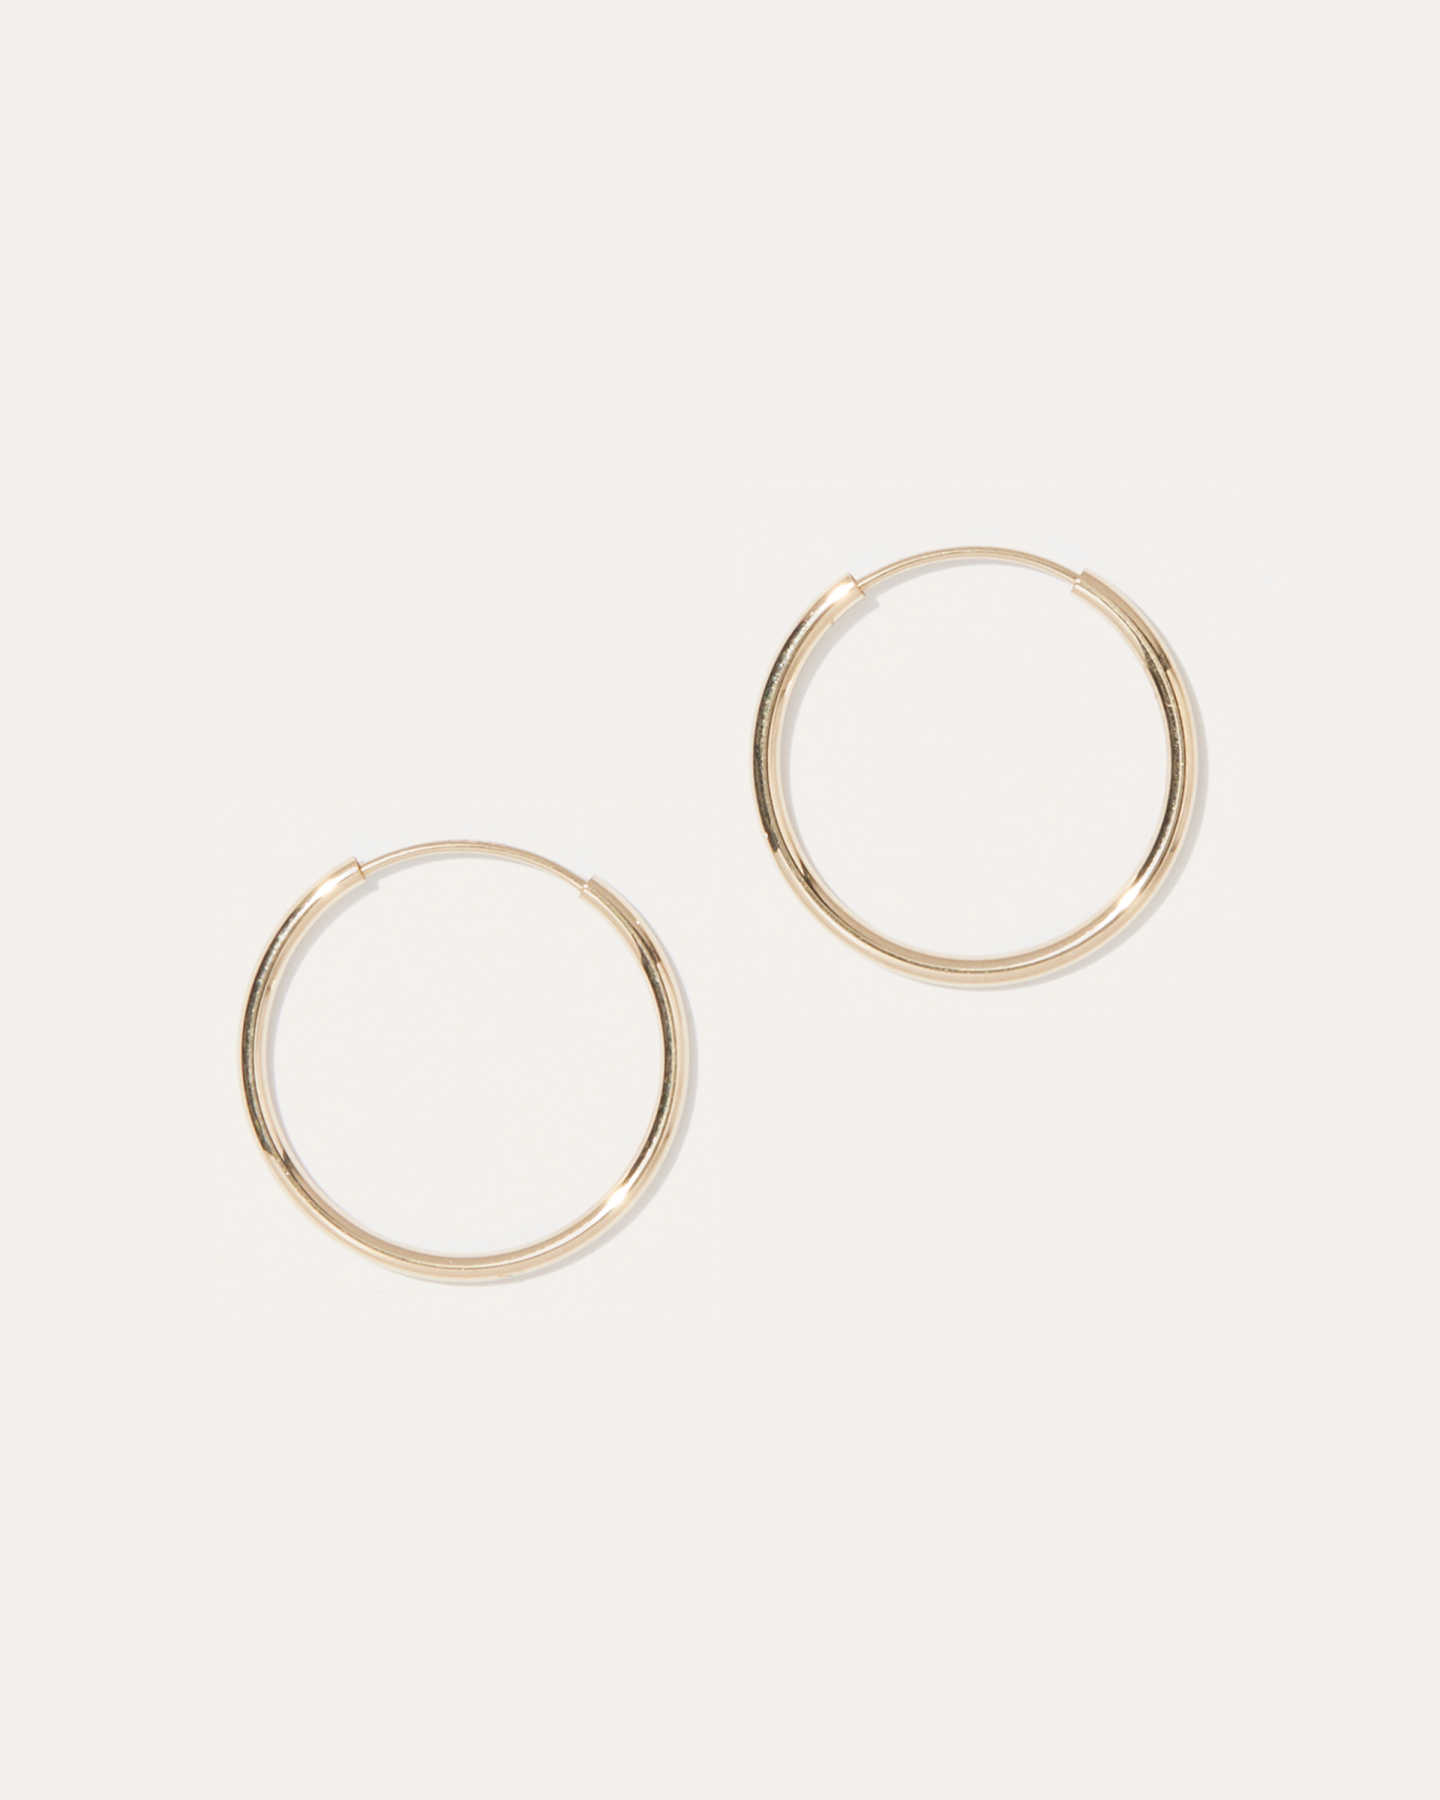 You May Also Like - 14k Gold Everyday 18mm Hoop Earrings - Yellow Gold